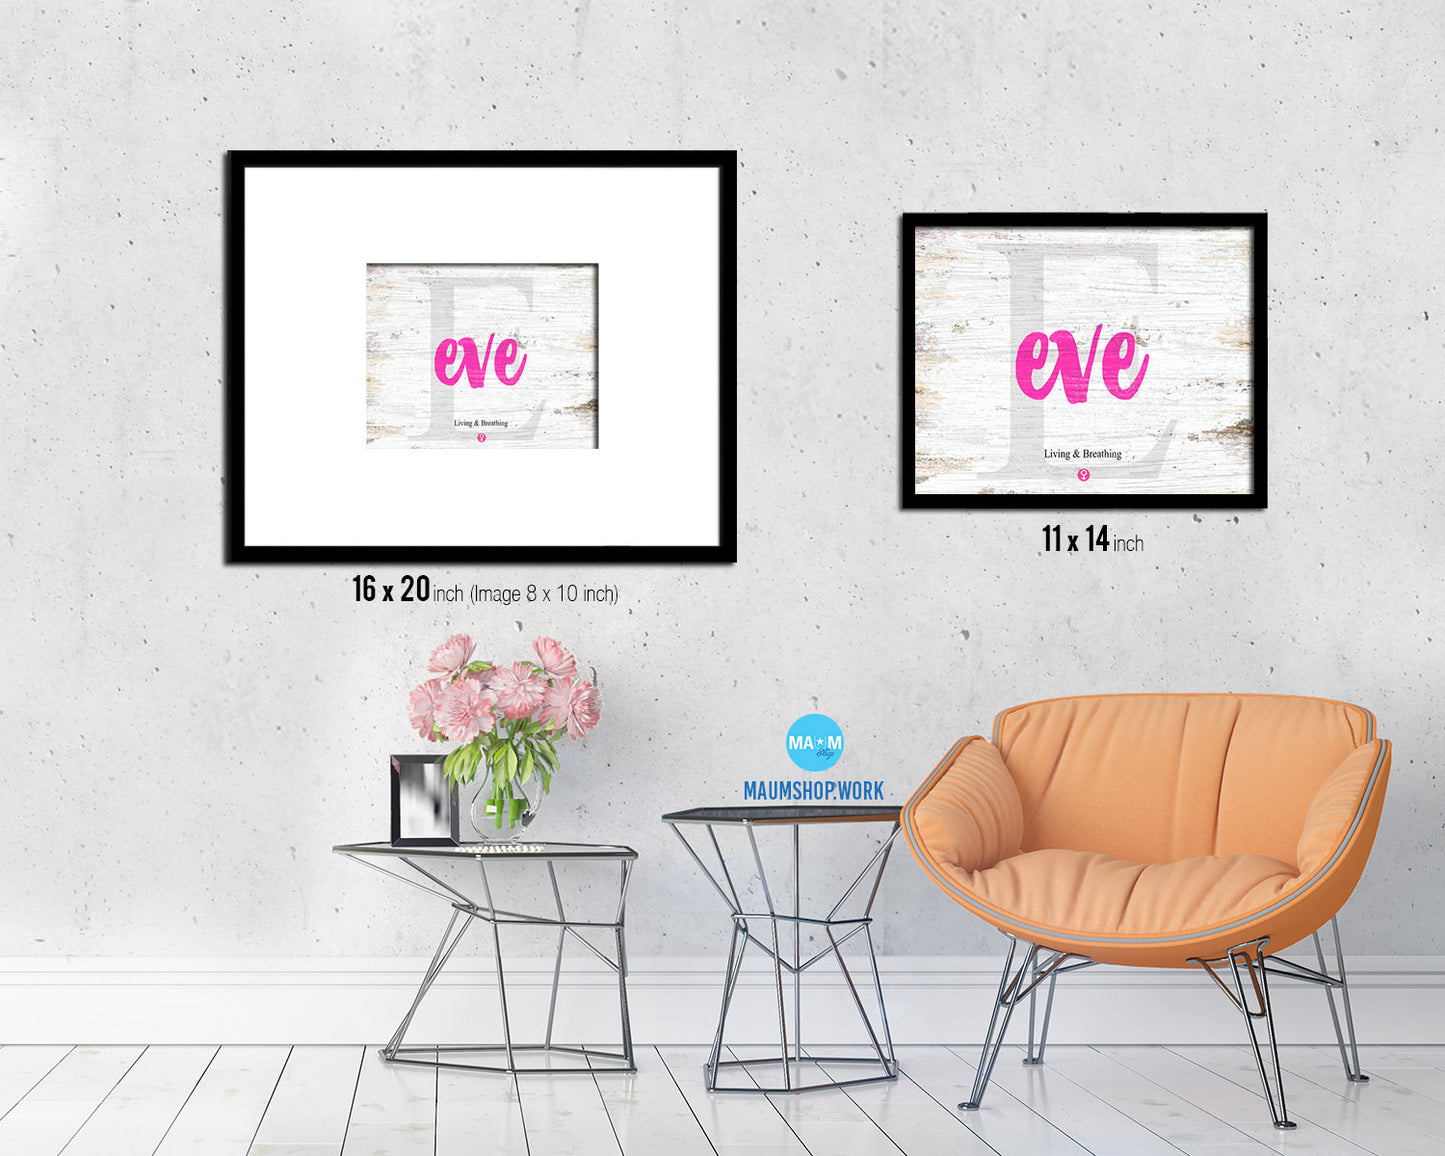 Eve Personalized Biblical Name Plate Art Framed Print Kids Baby Room Wall Decor Gifts